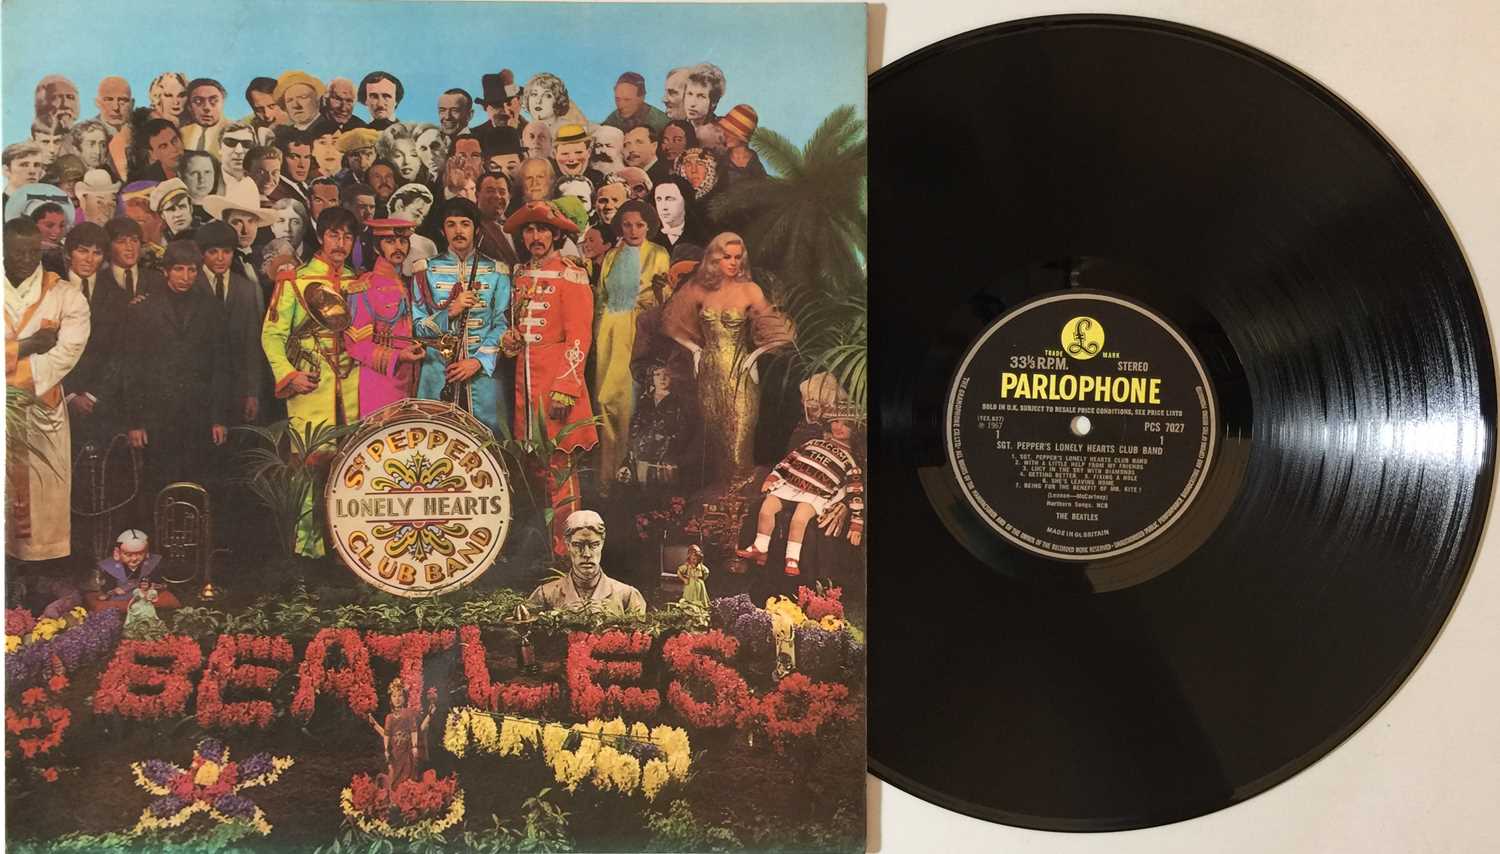 Lot 9 - THE BEATLES - SGT. PEPPER'S LONELY HEARTS CLUB BAND LP (ORIGINAL UK 'WIDE SPINE' STEREO COPY - PCS 7027)